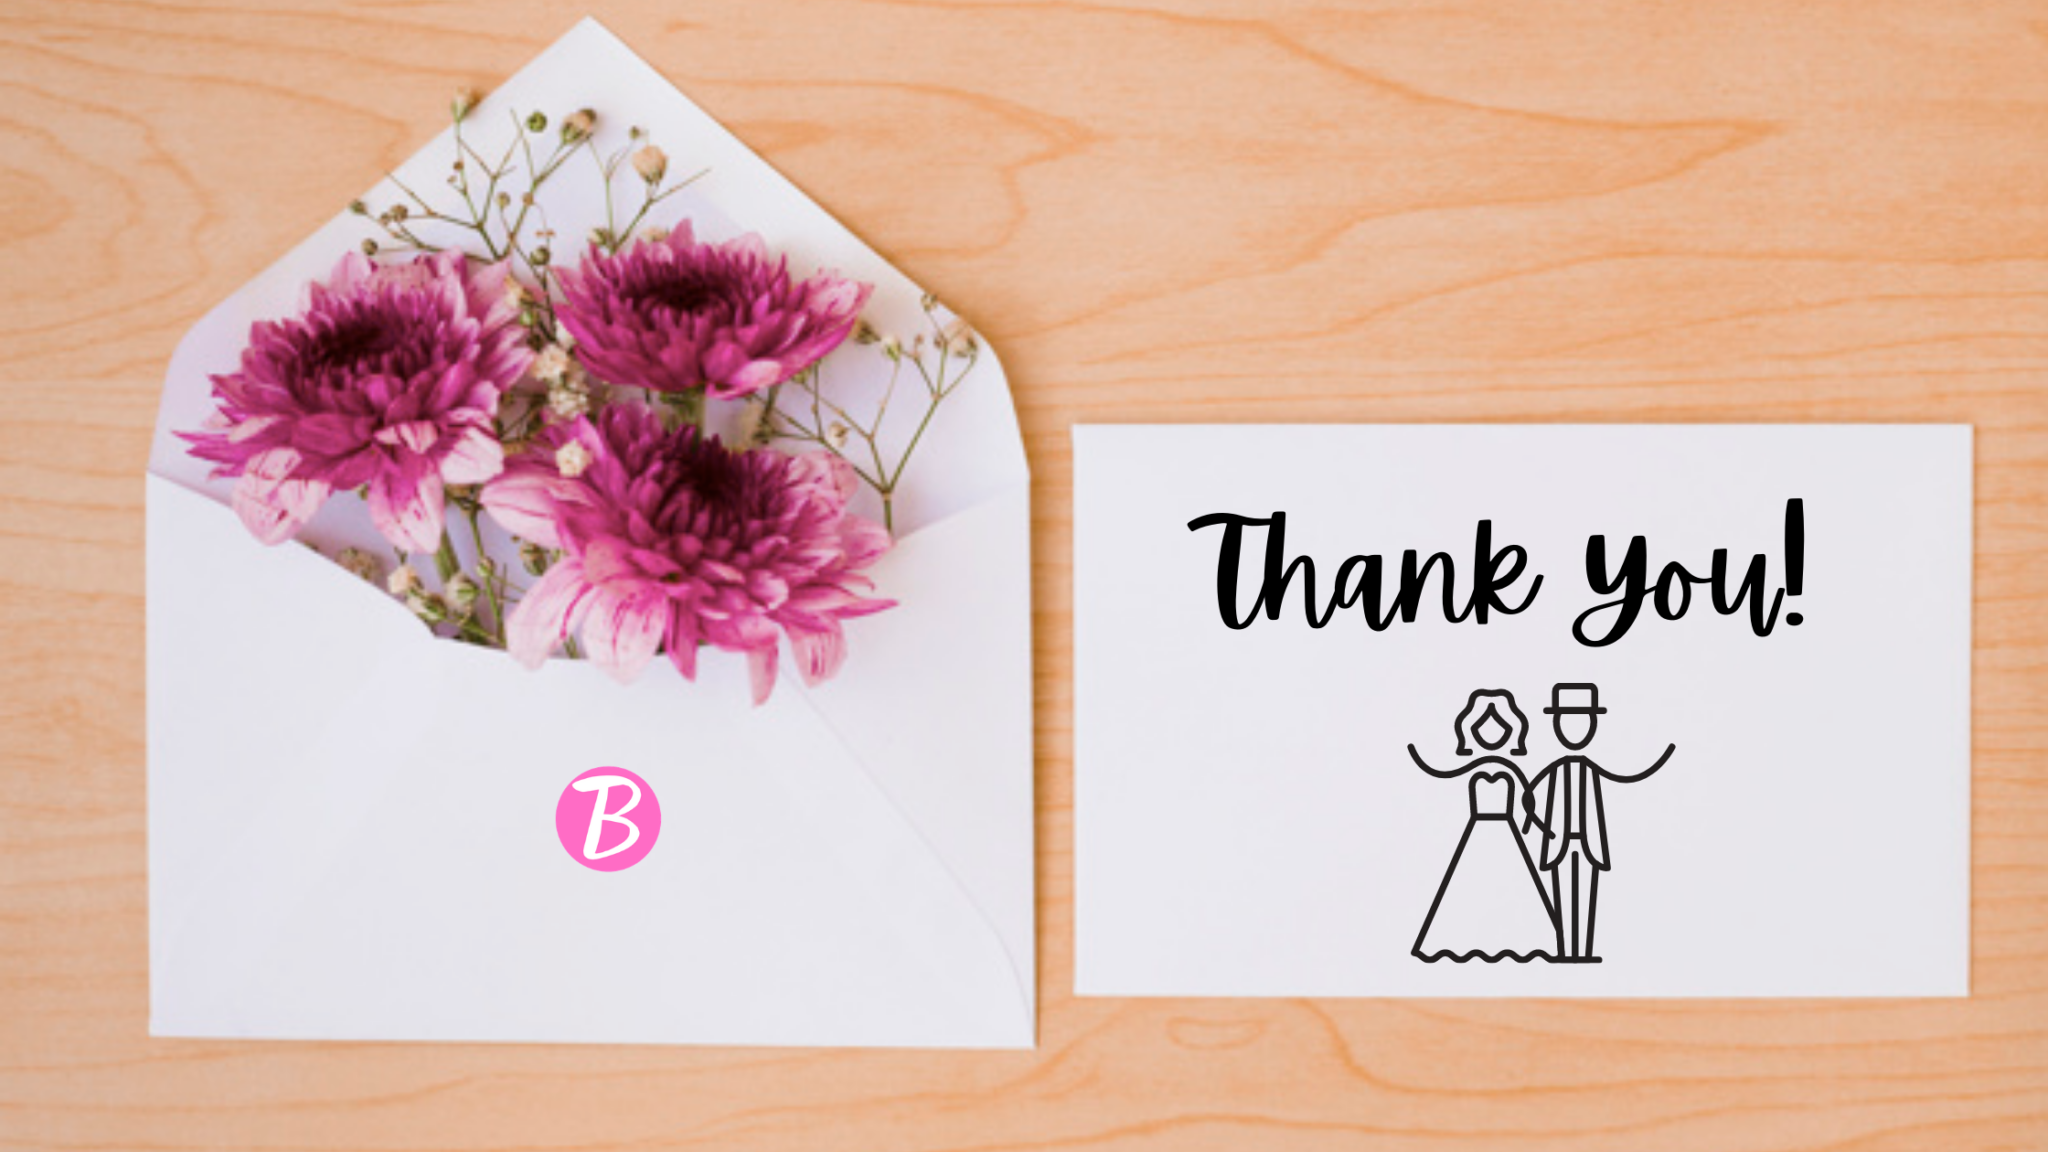 What To Say In A Thank You Card For Wedding Money